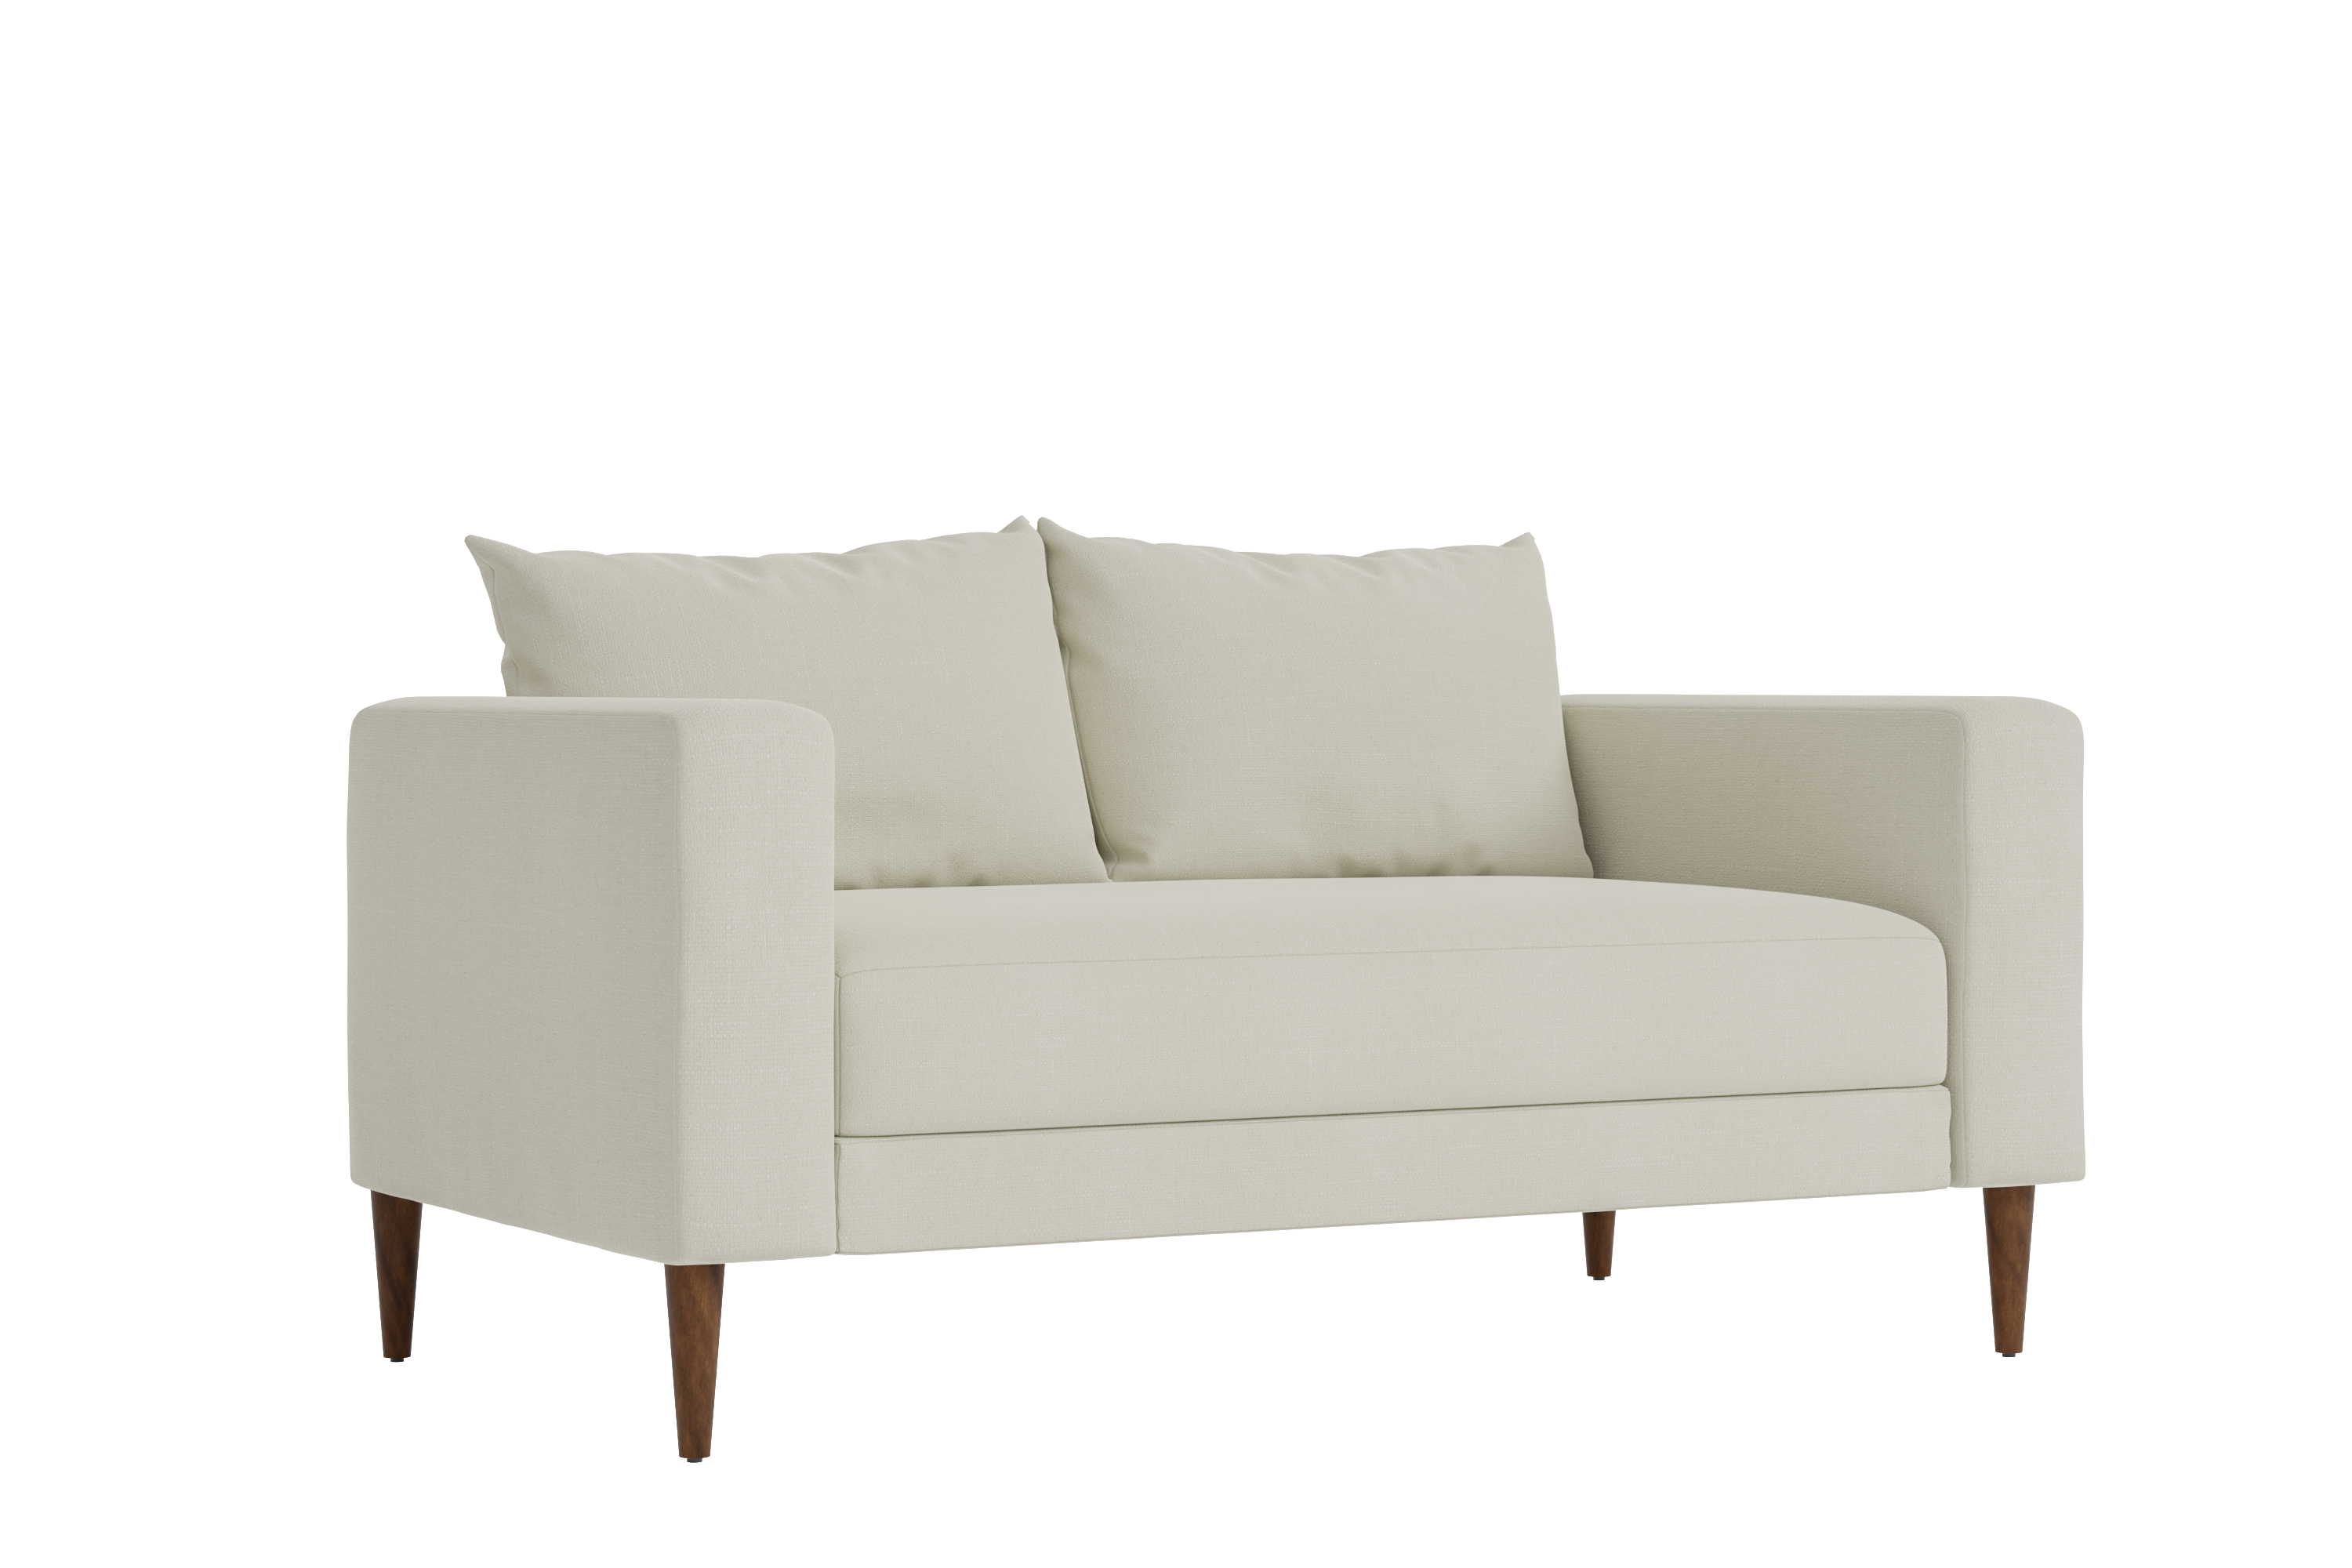 The Essential Loveseat in Upcycled Poly